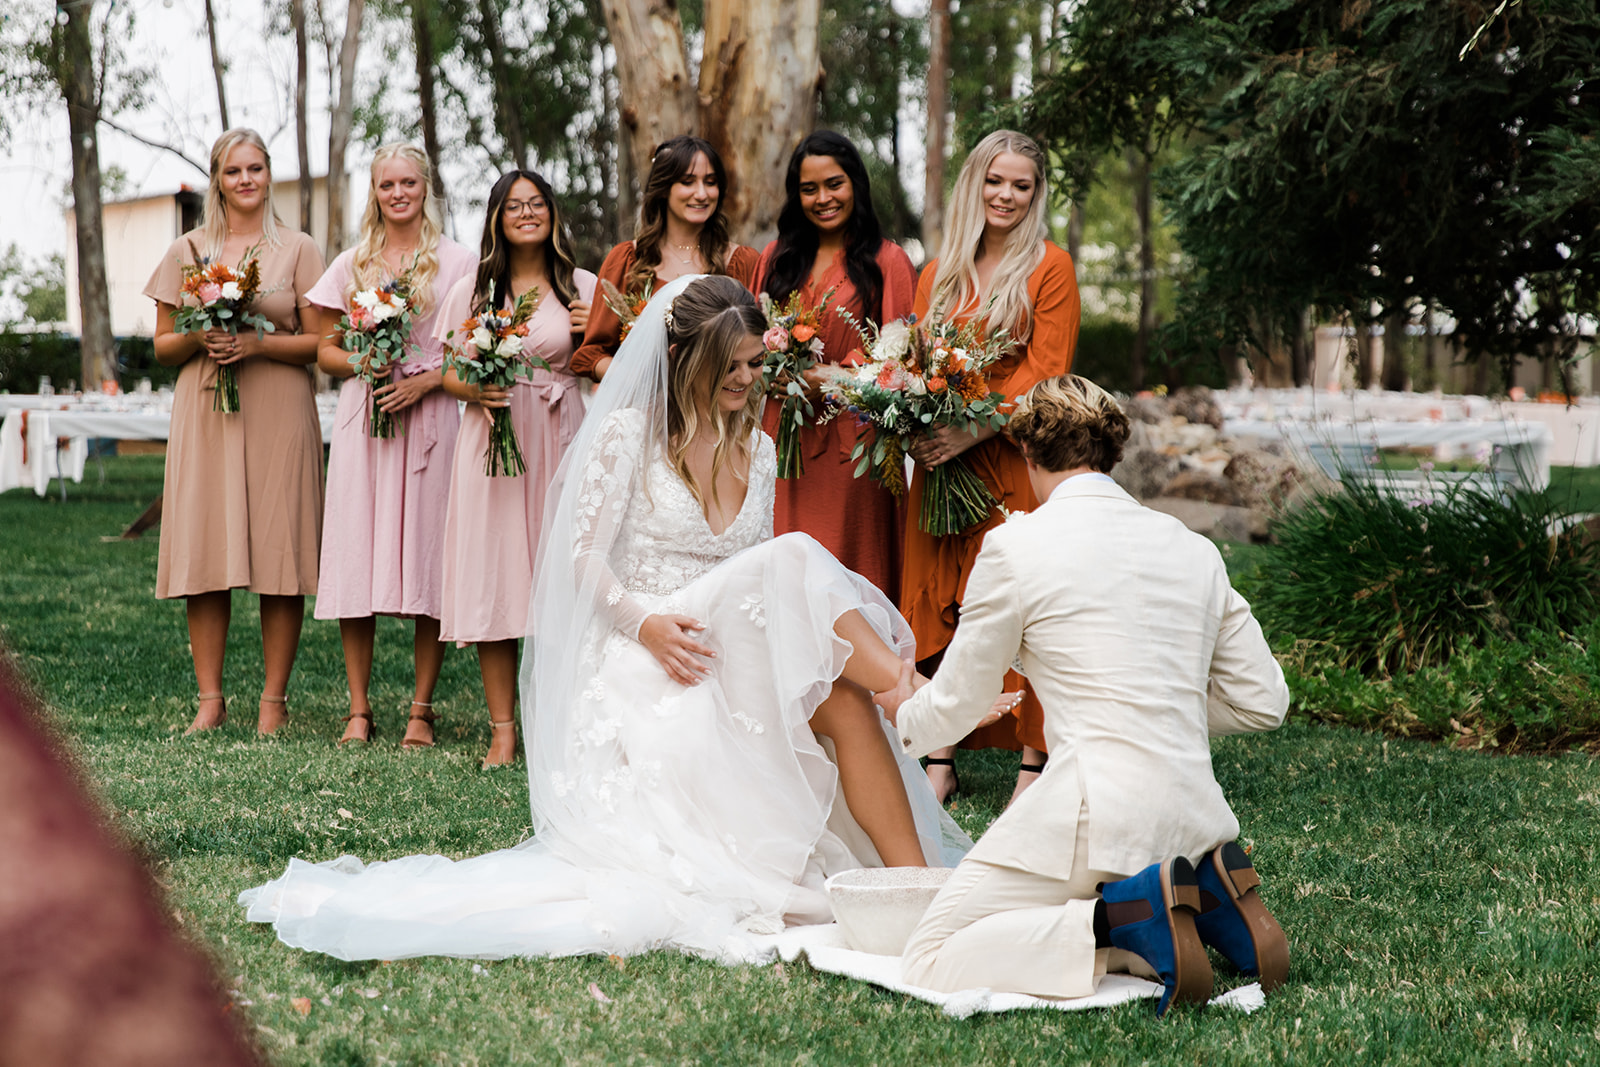 bride and groom have an intimate foot washing during ceremony